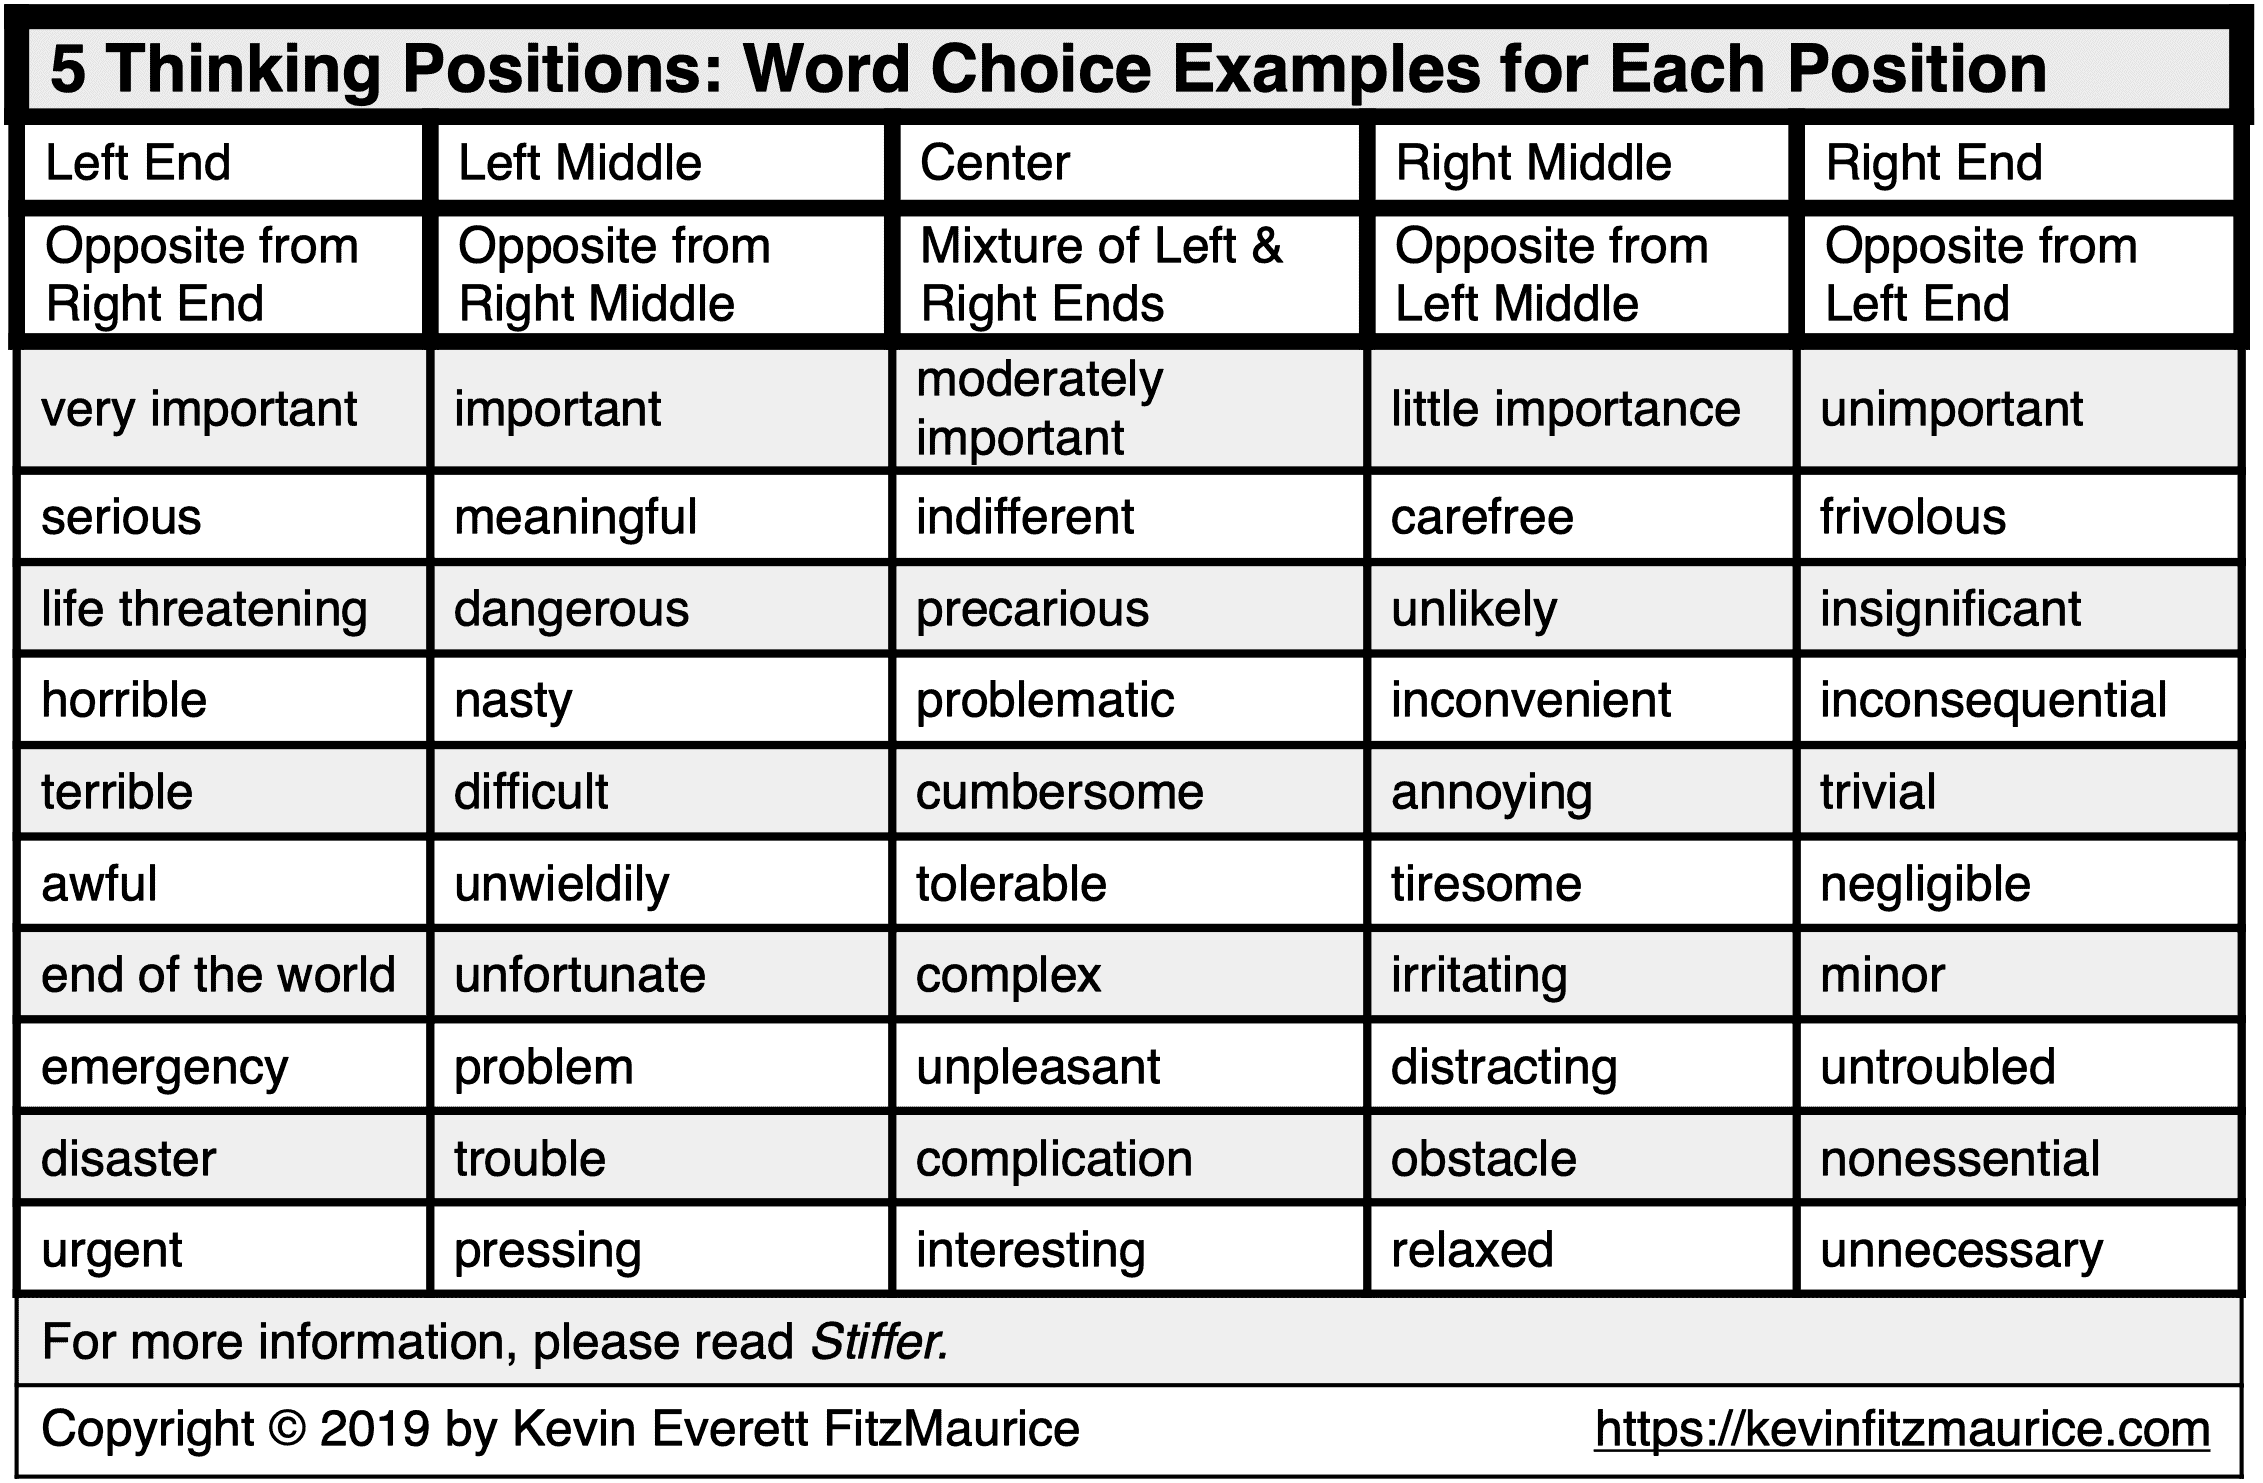 5TP or 5 Thinking Position Word Choice Examples